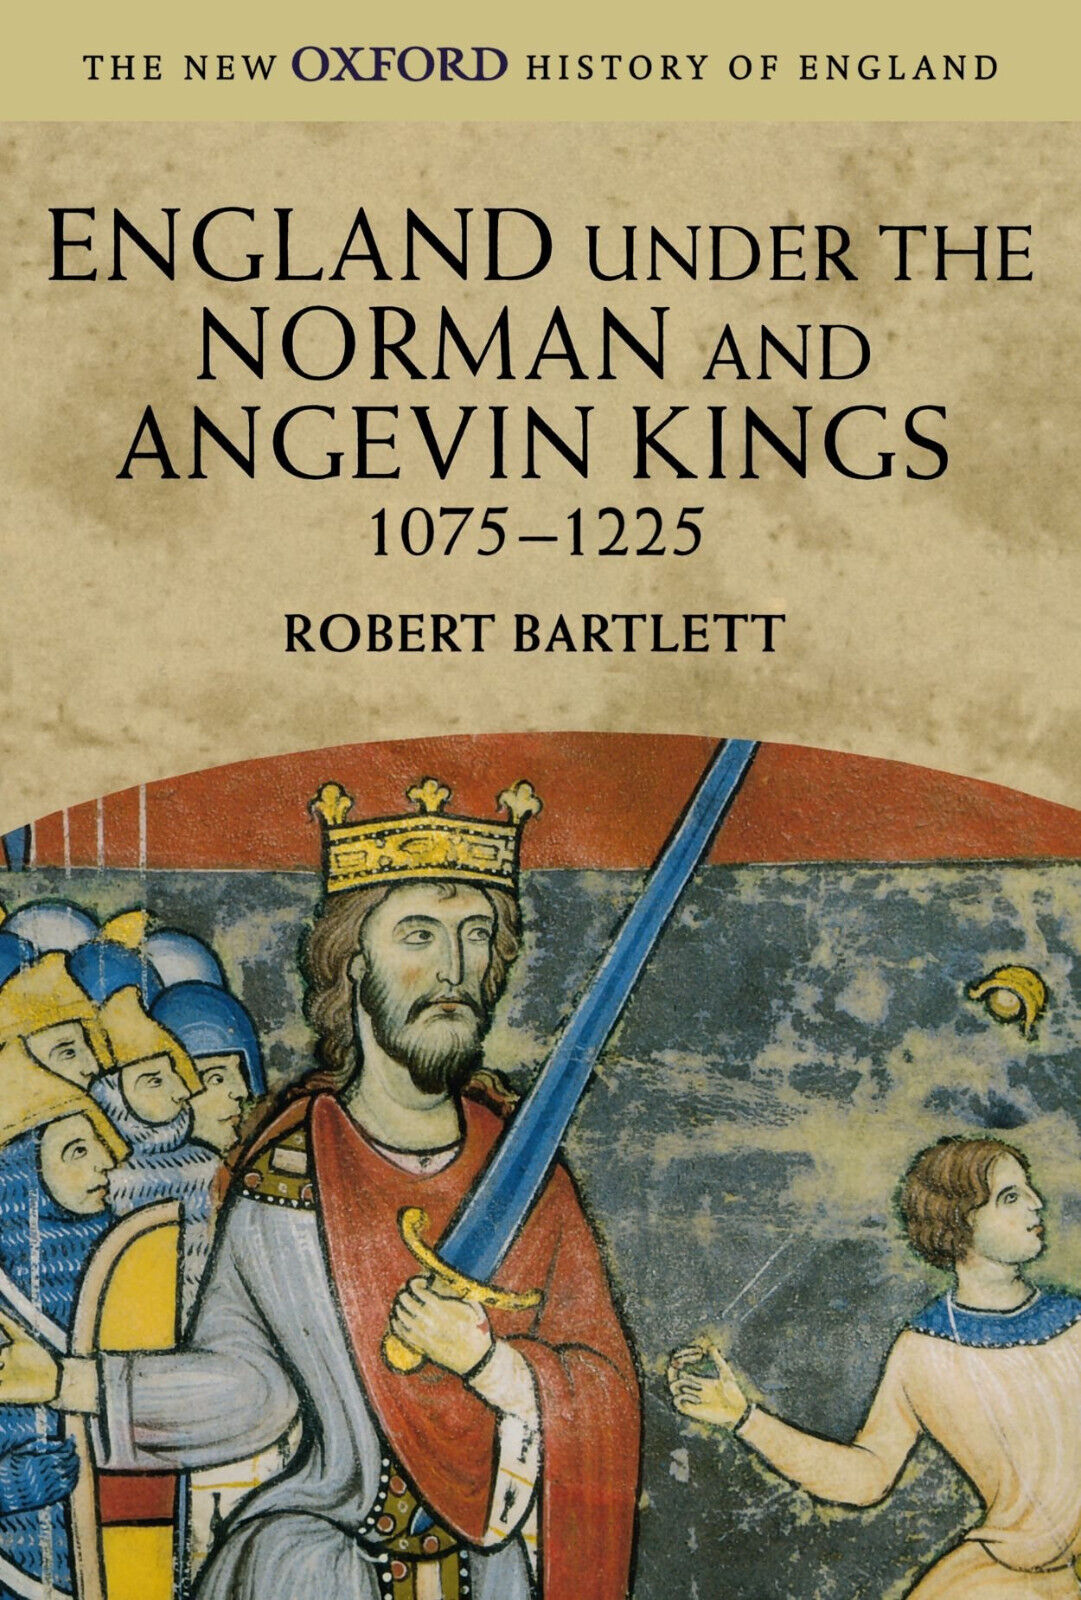 England under the Norman and Angevin Kings - Robert - Oxford, 2003